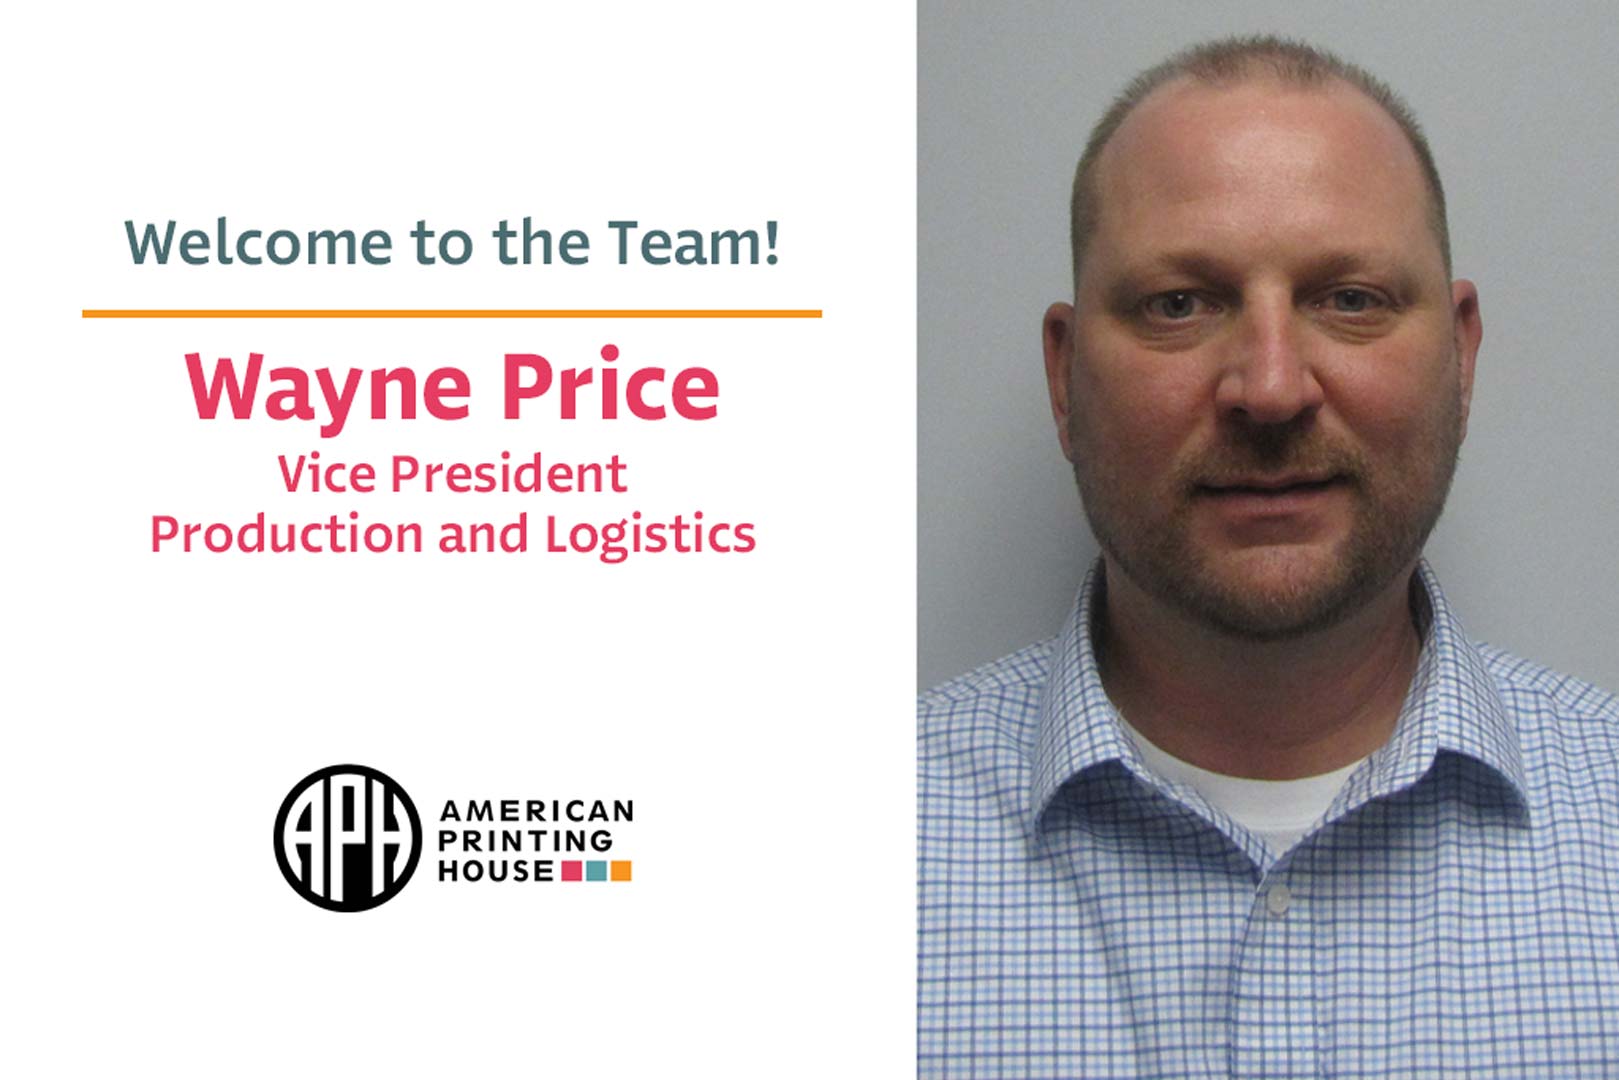 “Welcome to the team! Wayne Price, Vice President Production and Logistics.” APH logo. Headshot of Wayne smiling.